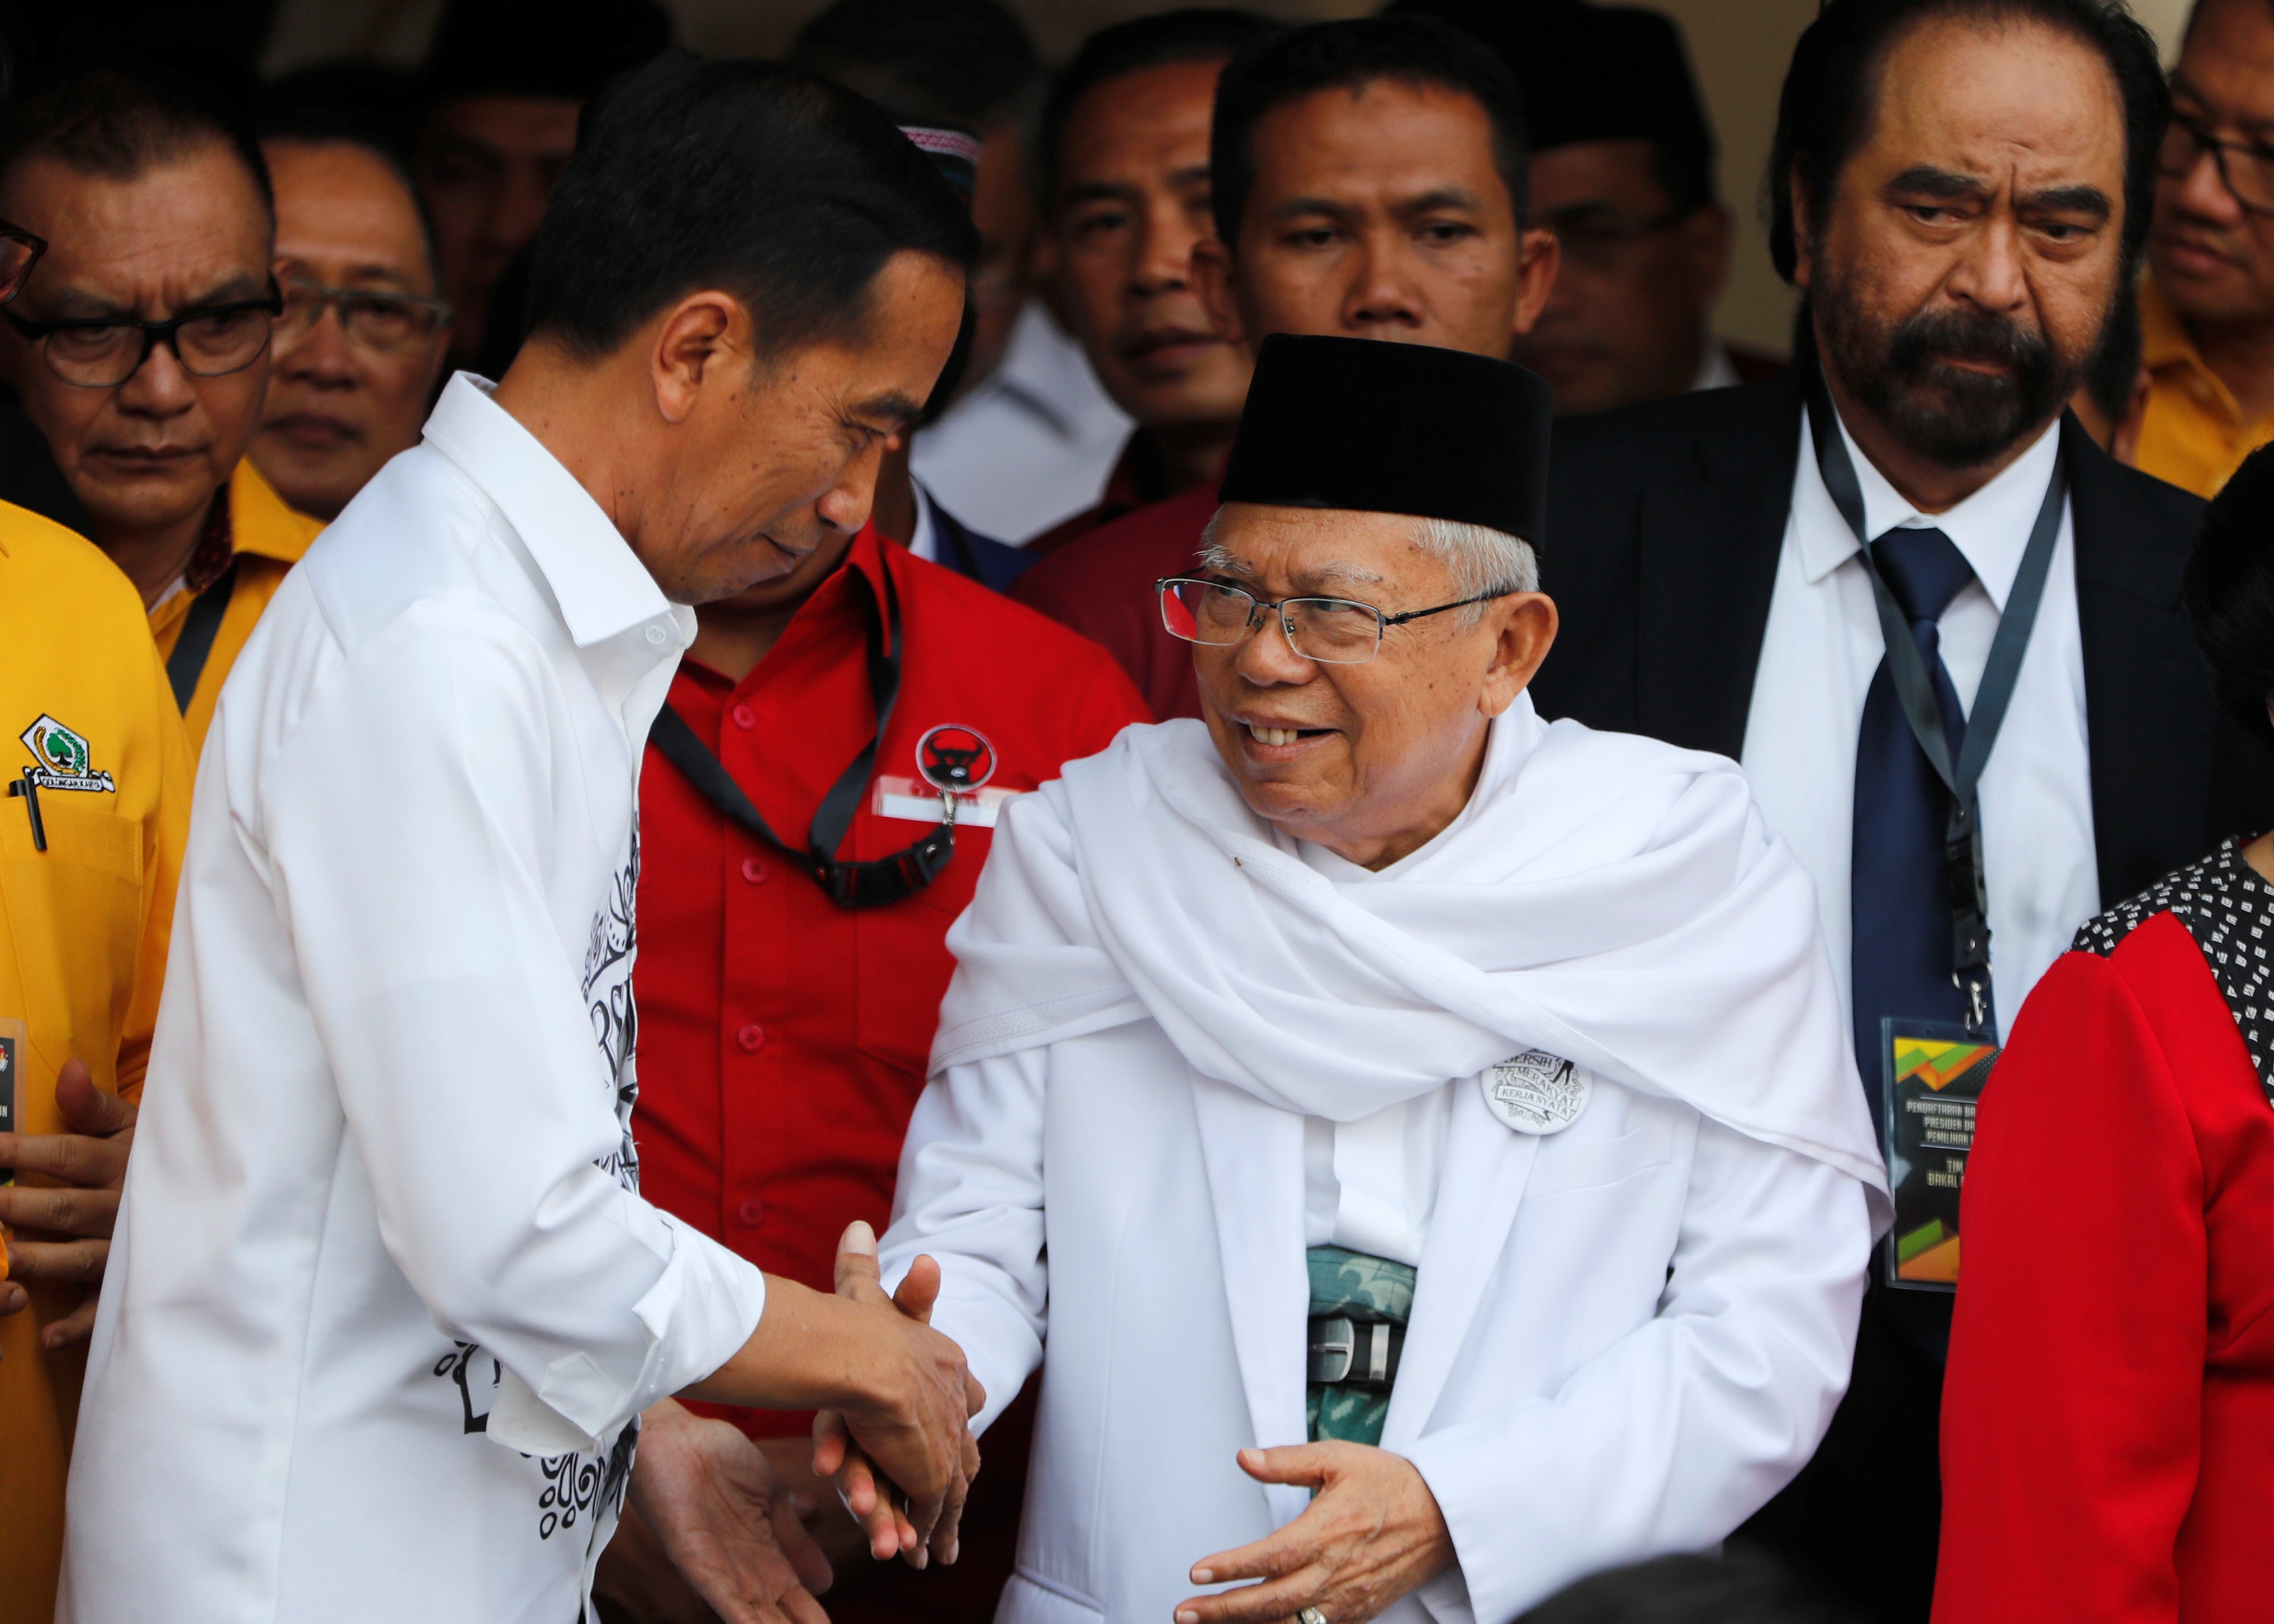 Indonesian President Joko Widodo, left, with his vice-presidential running mate Ma’ruf Amin while greeting supporters in Jakarta on Friday. Photo: Reuters